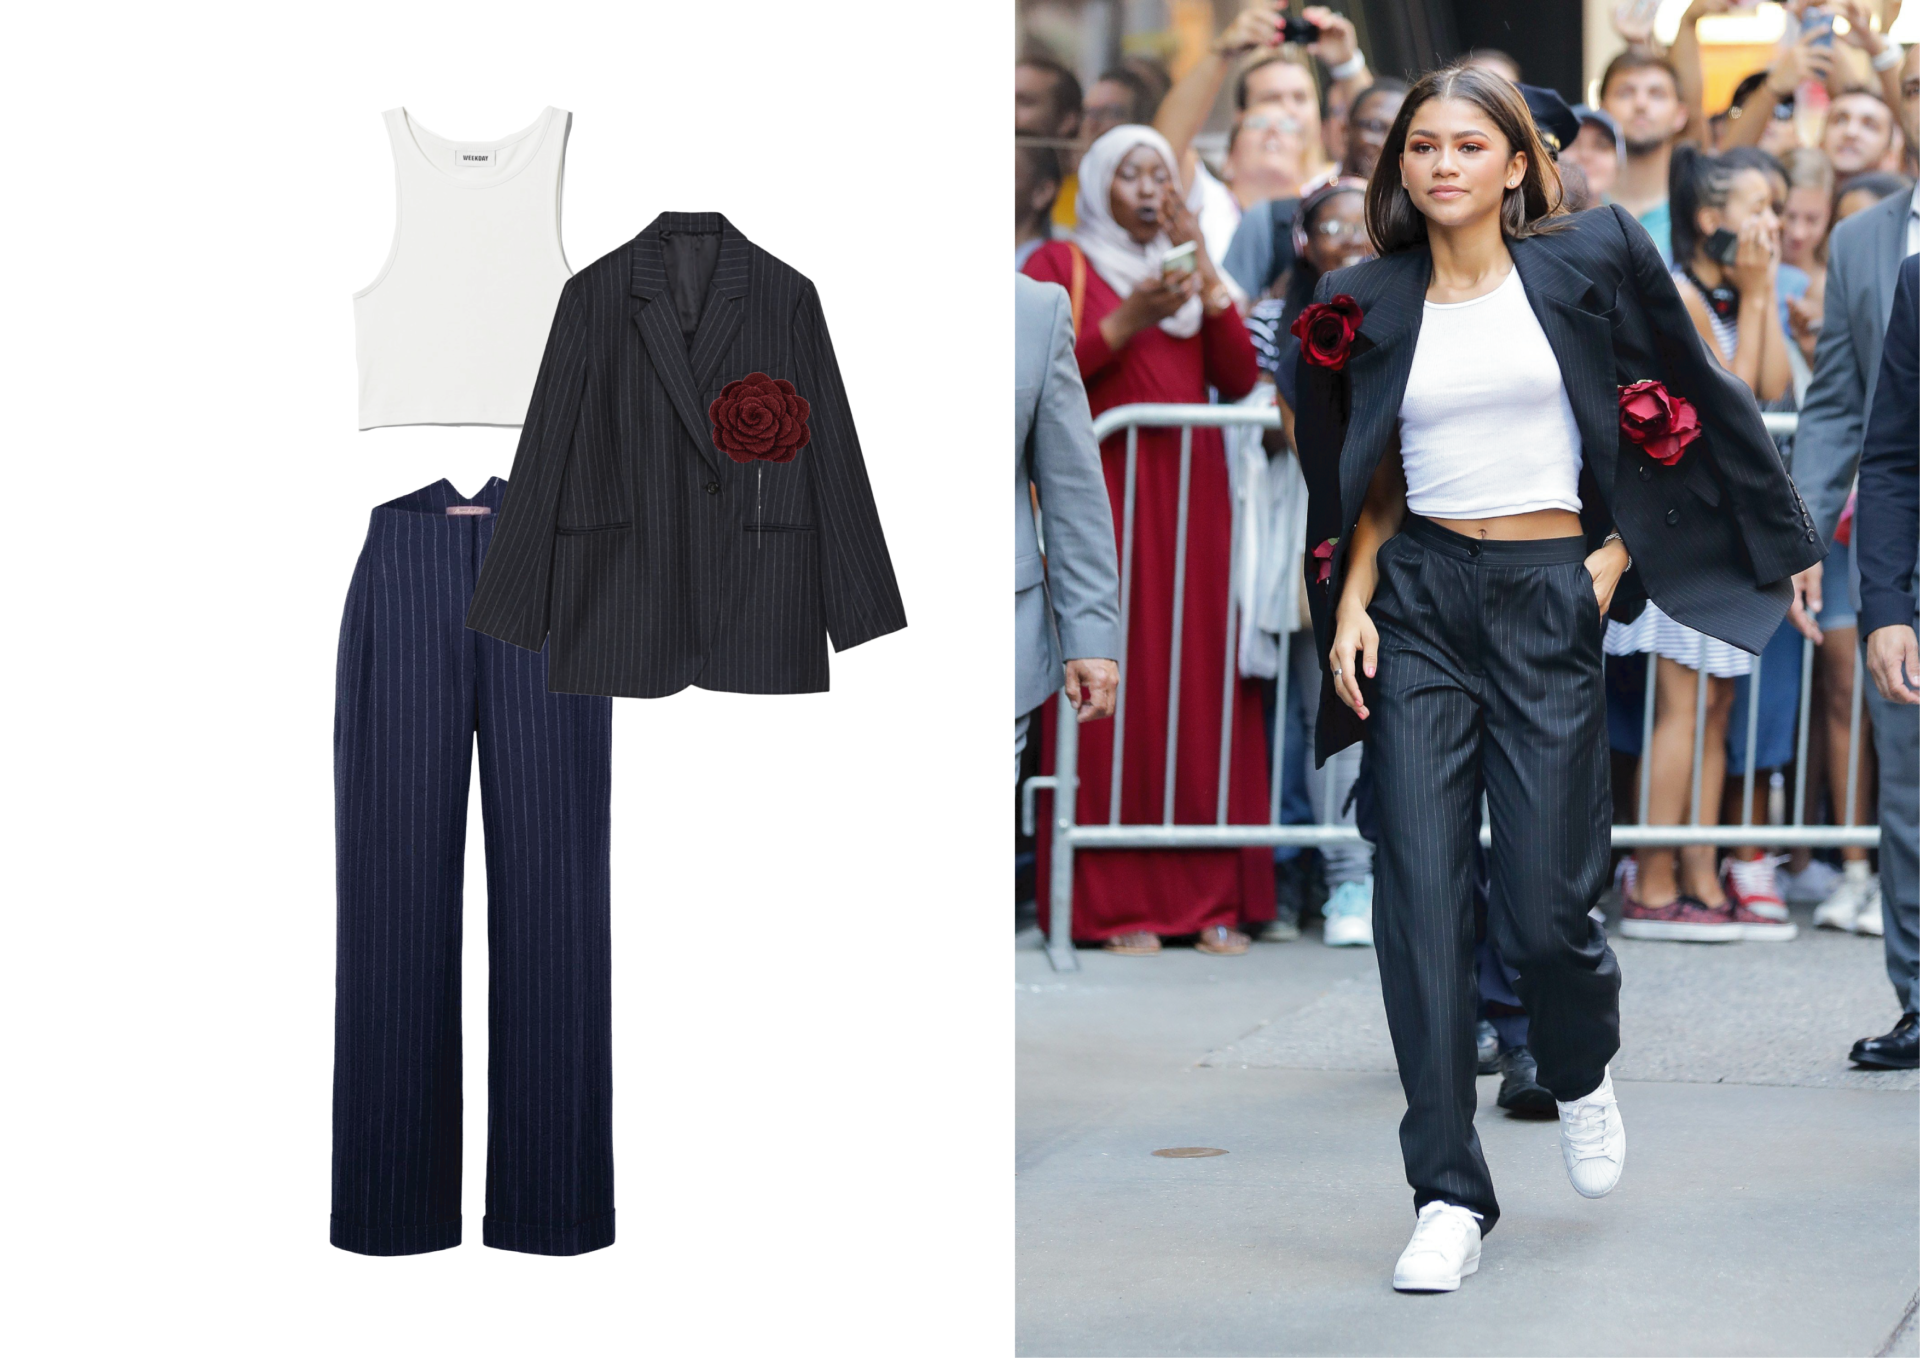 Zendaya's Top 7 Off-Duty Looks To Copy At Home - Voir Fashion